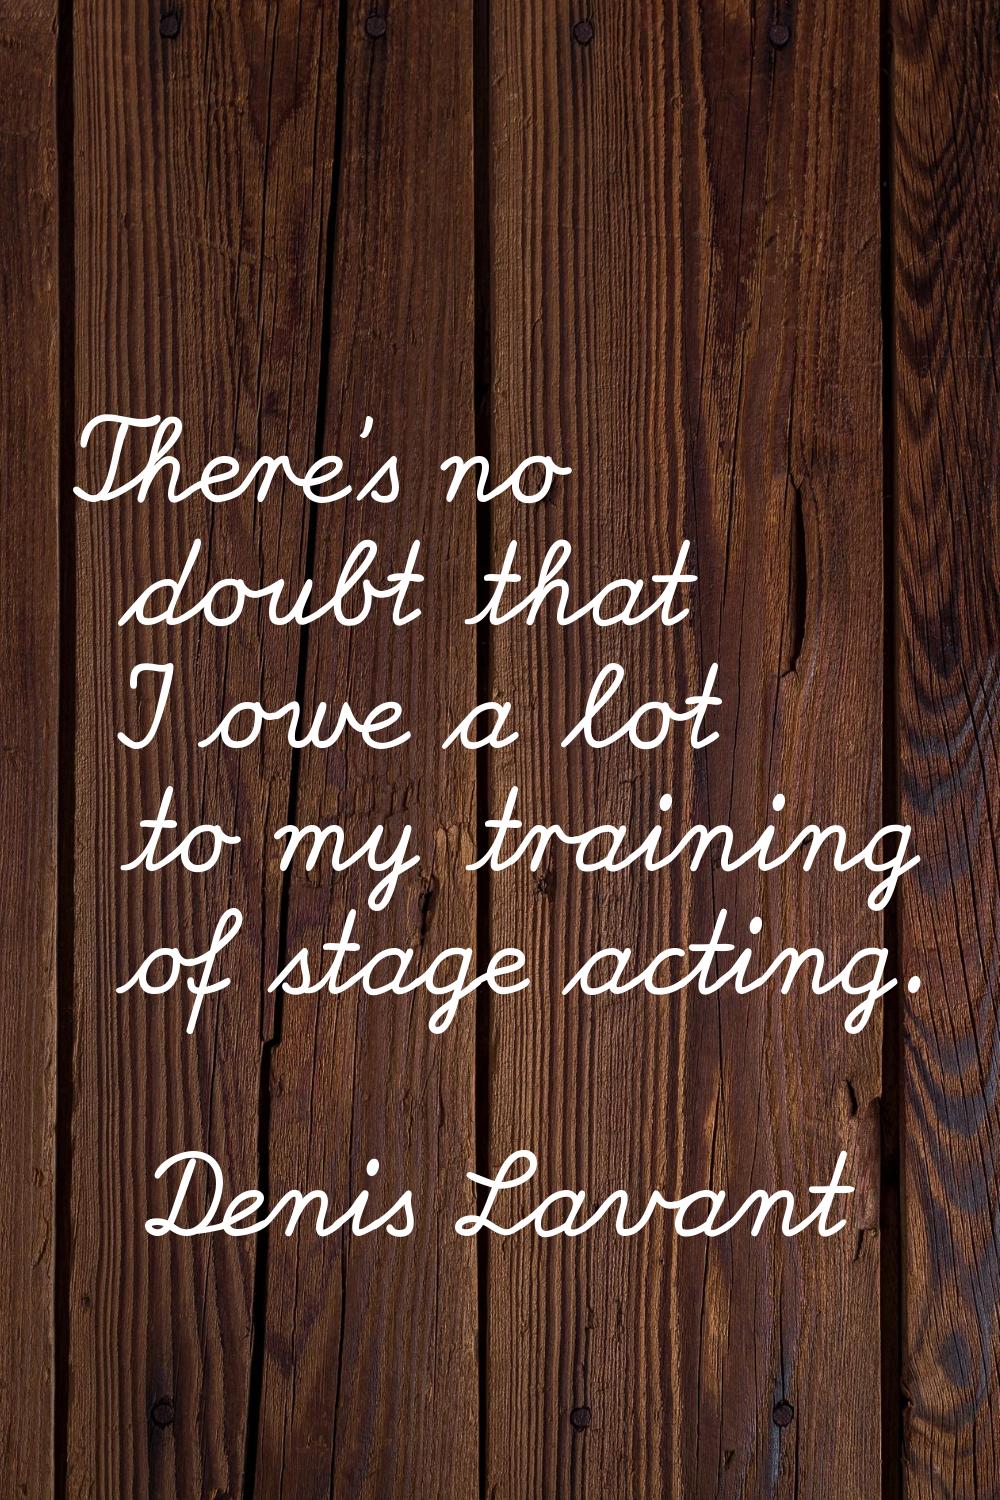 There's no doubt that I owe a lot to my training of stage acting.